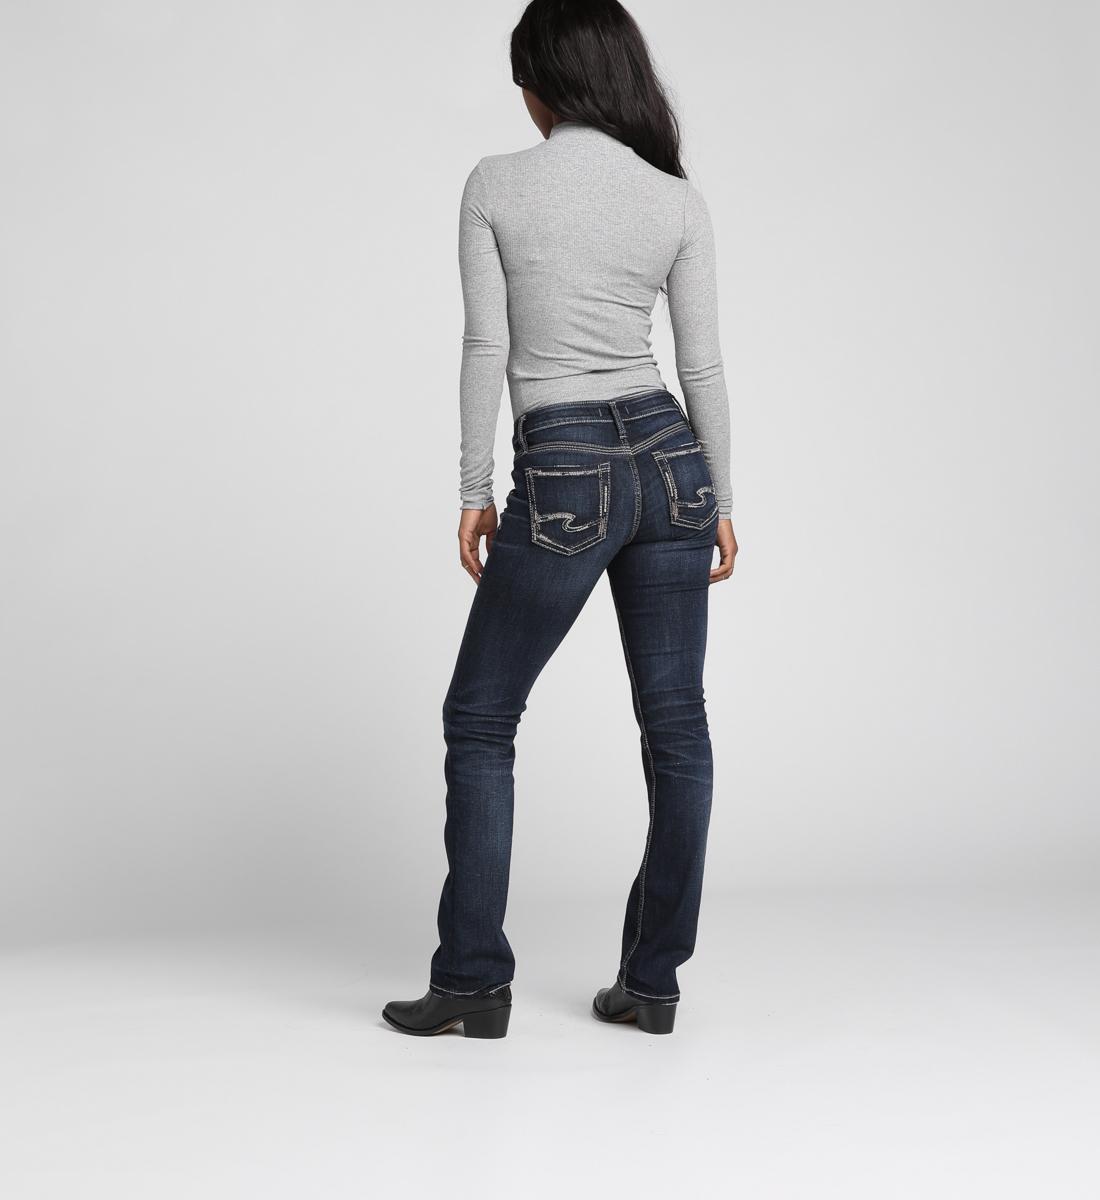 silver jeans on sale womens